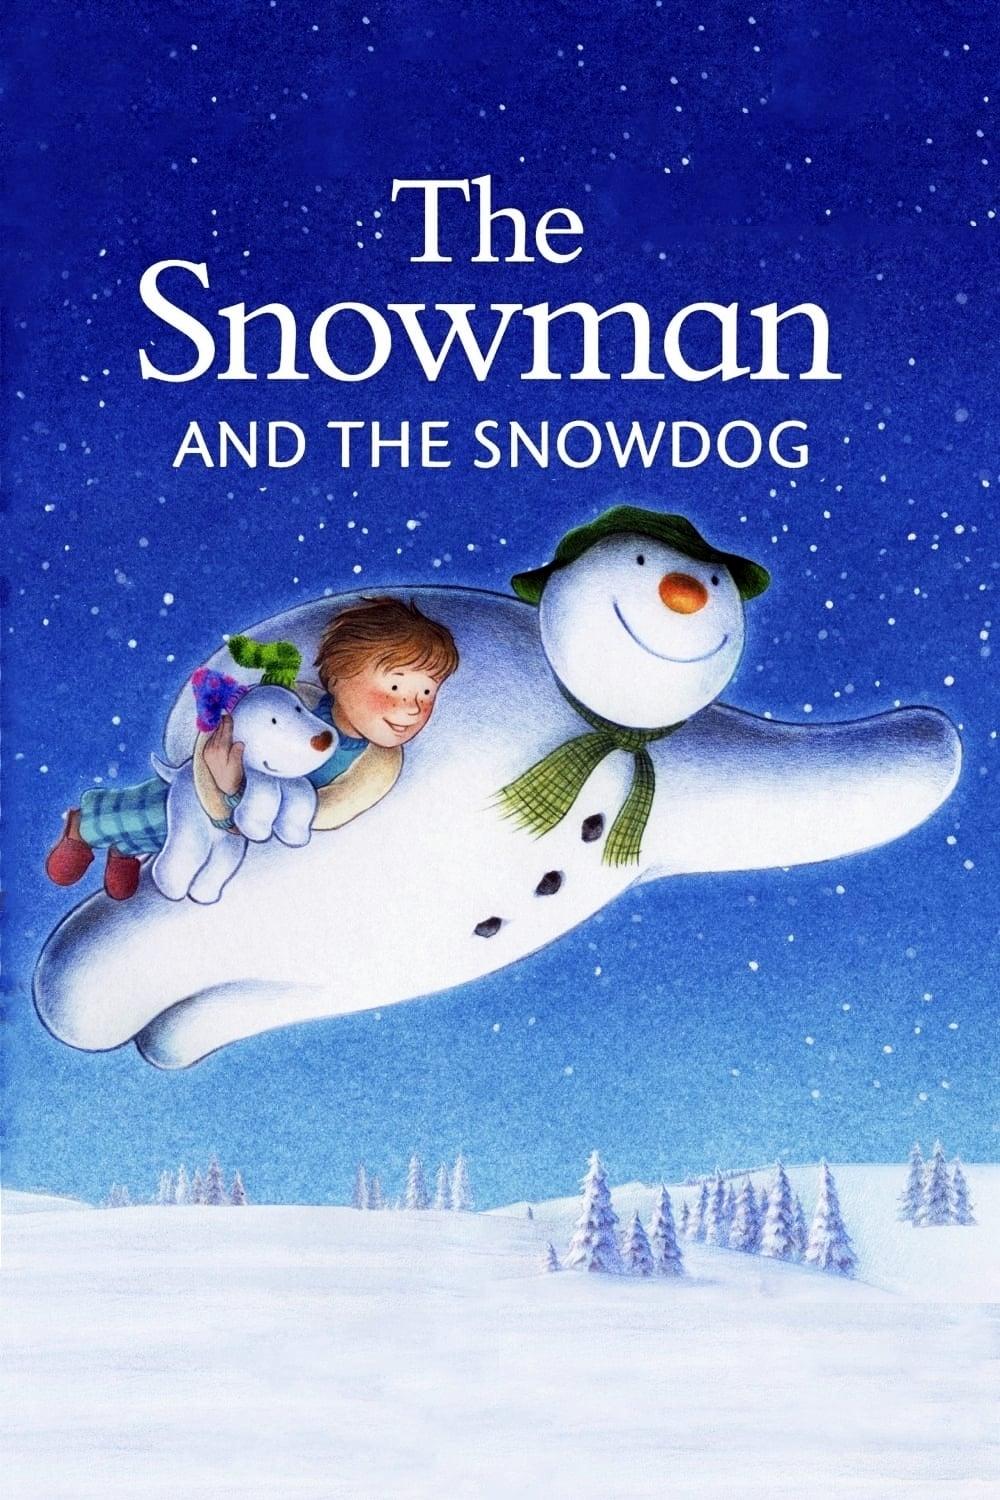 The Snowman and The Snowdog poster